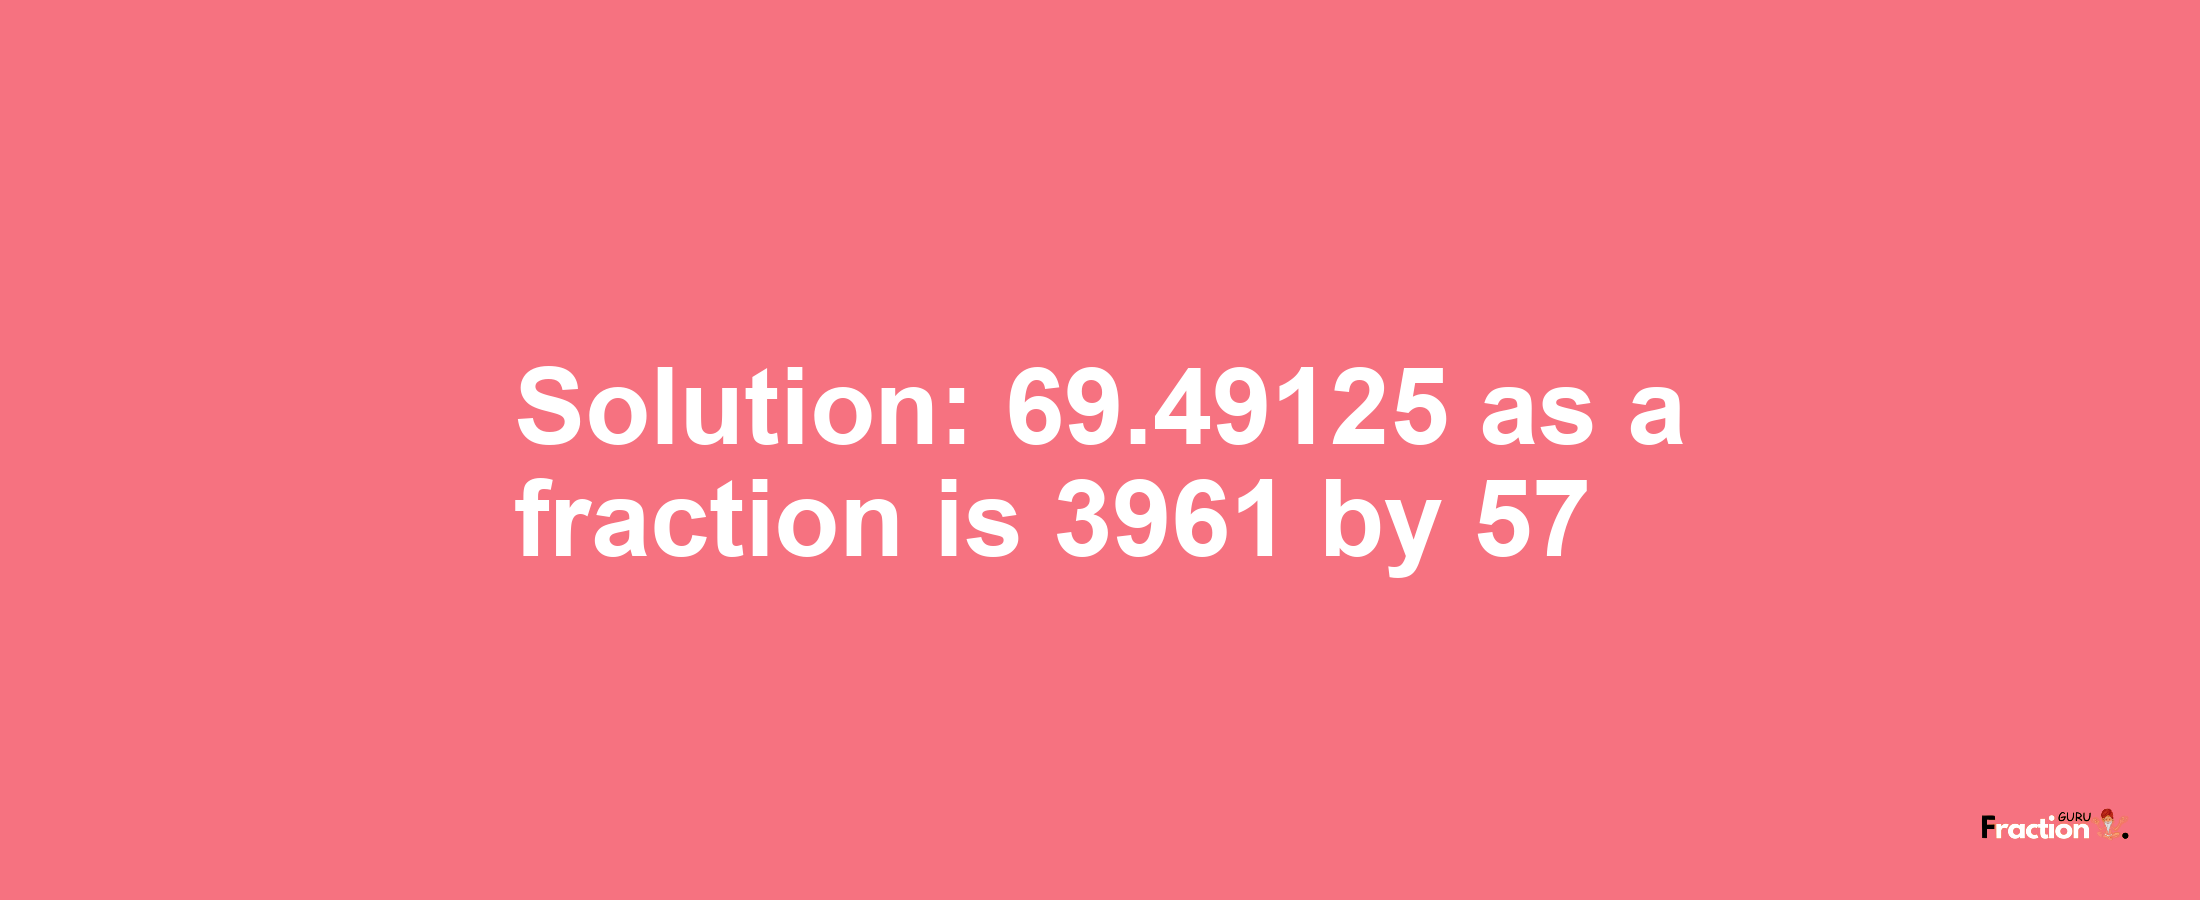 Solution:69.49125 as a fraction is 3961/57